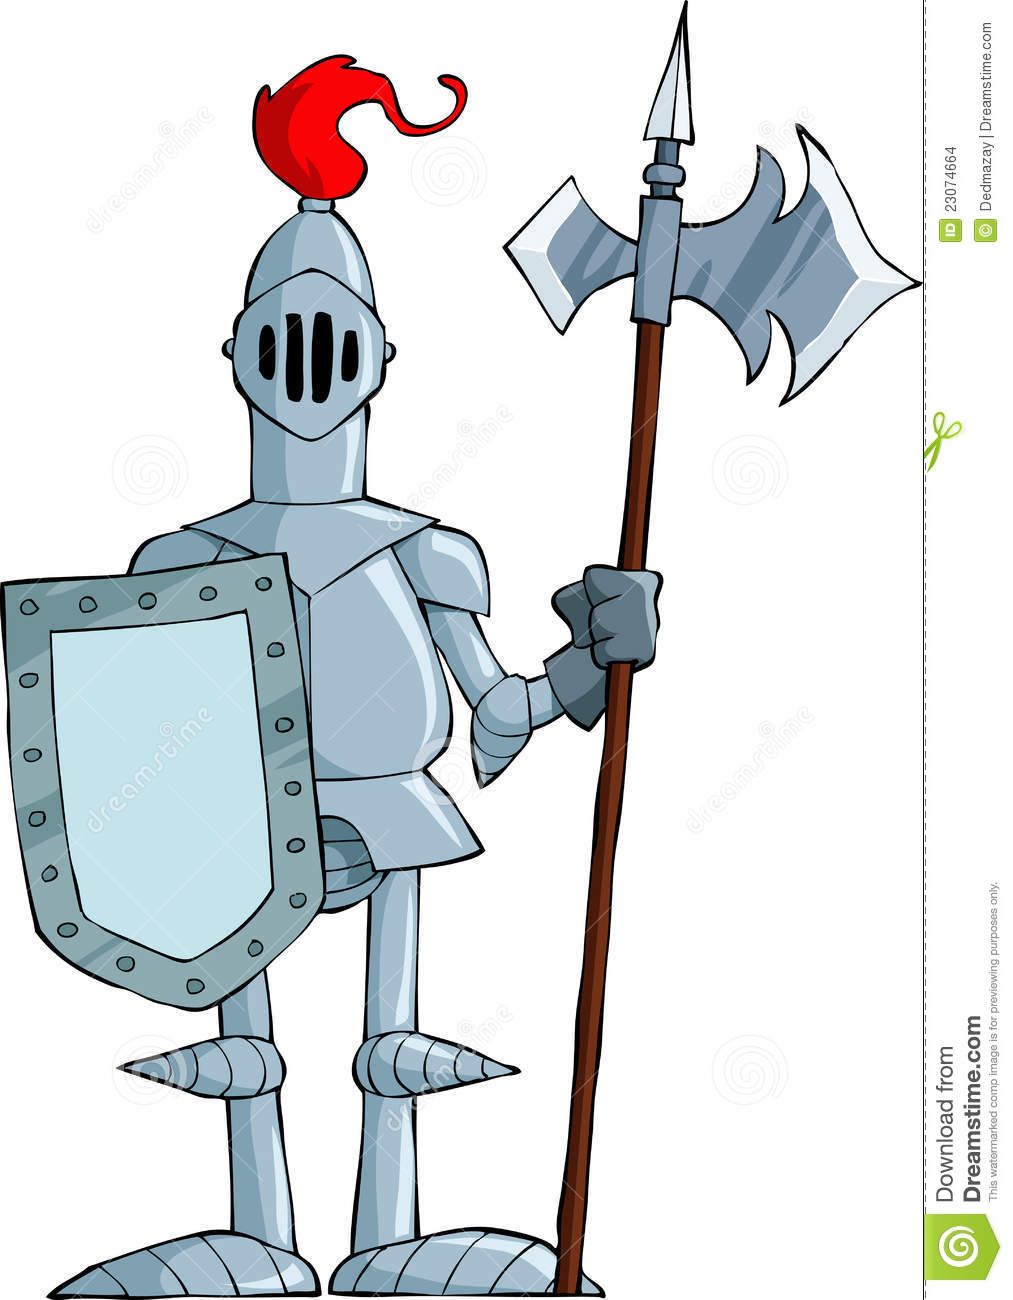 Cartoon stock images image. Brave clipart medieval knight